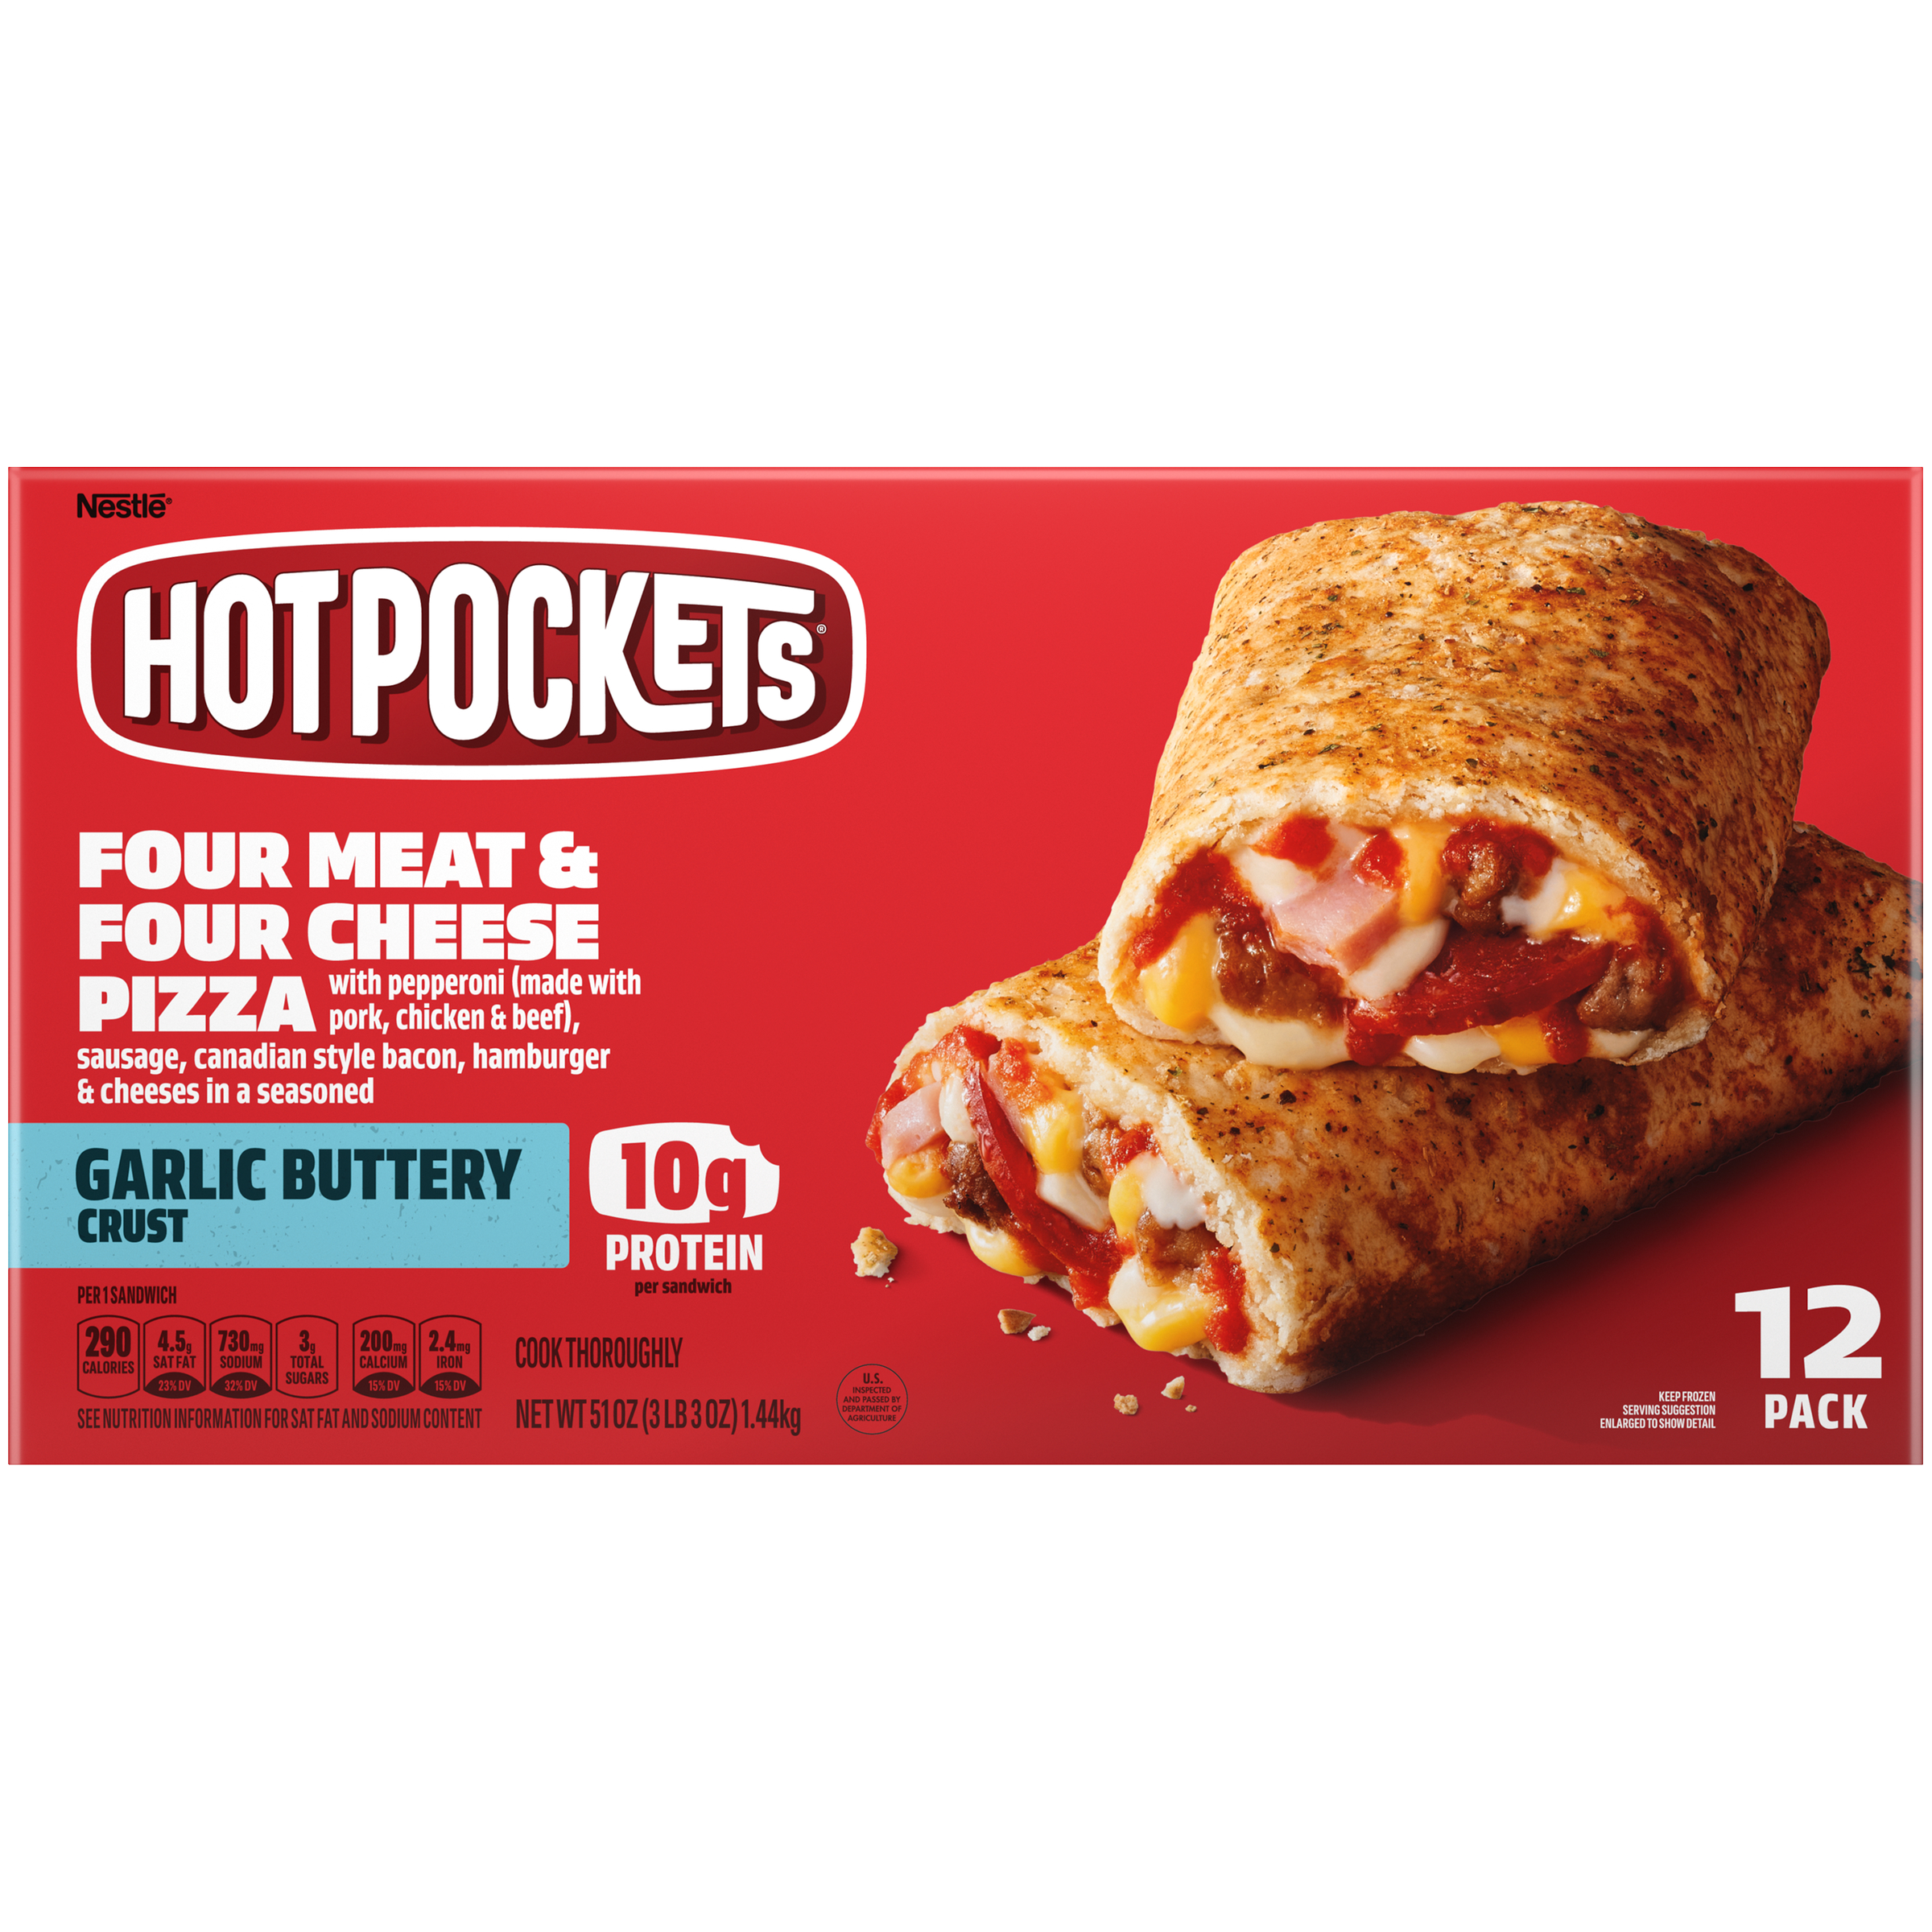 HOT POCKETS Garlic Buttery Crust Four Meat & Cheese Pizza (12 Pack) 4 units per case 51.0 oz